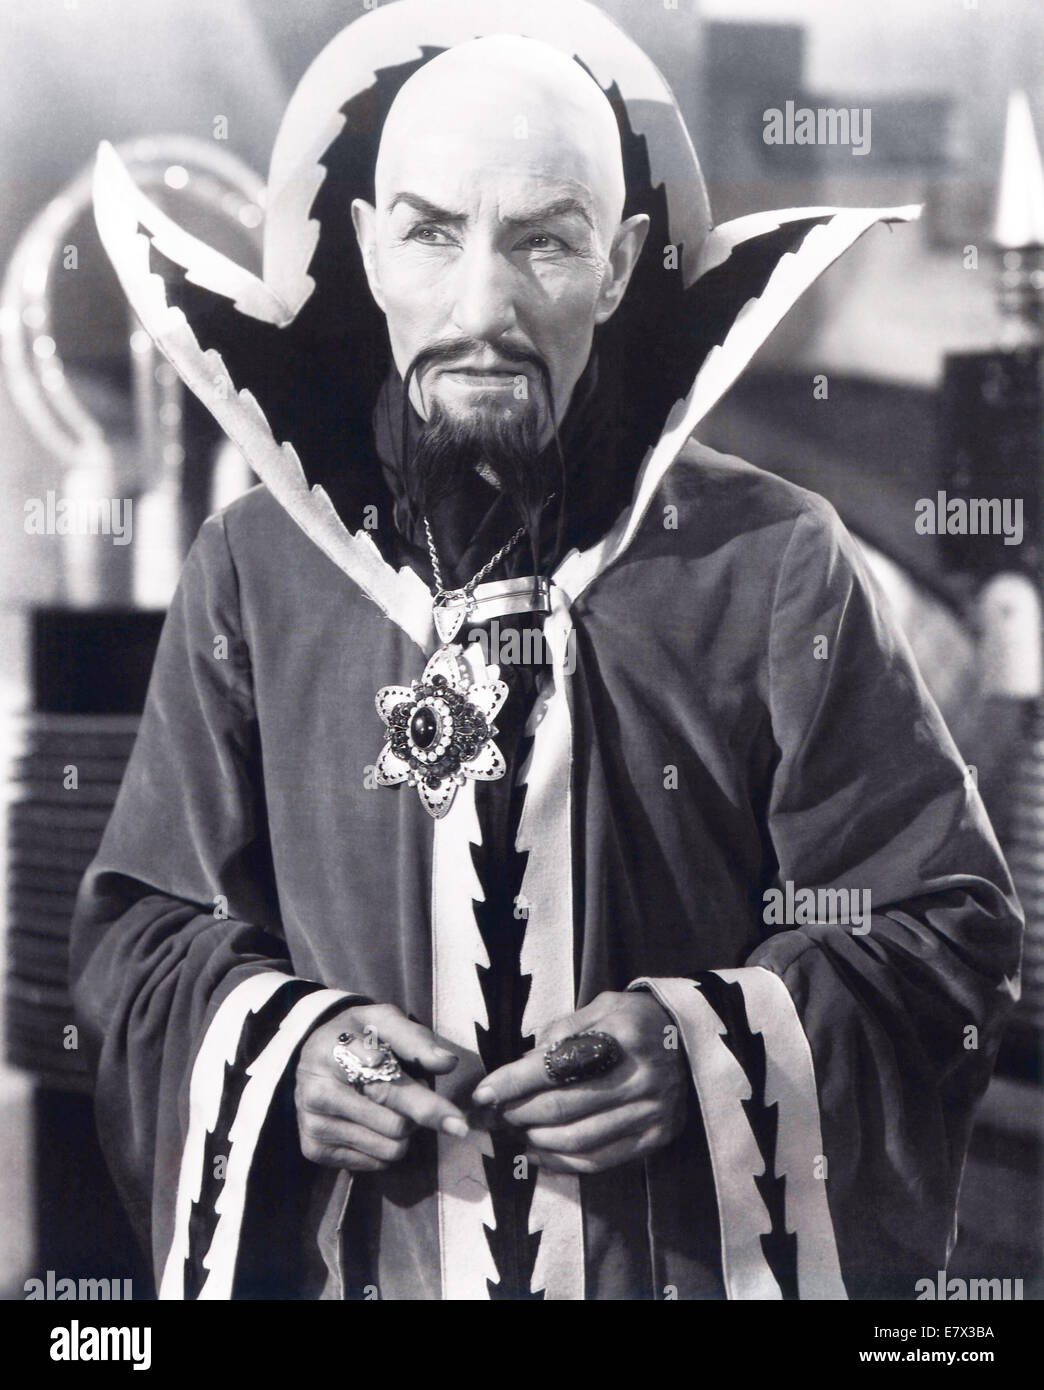 FLASH GORDON  1936 Universal Pictures film with Charles Middleton as Ming the Merciless